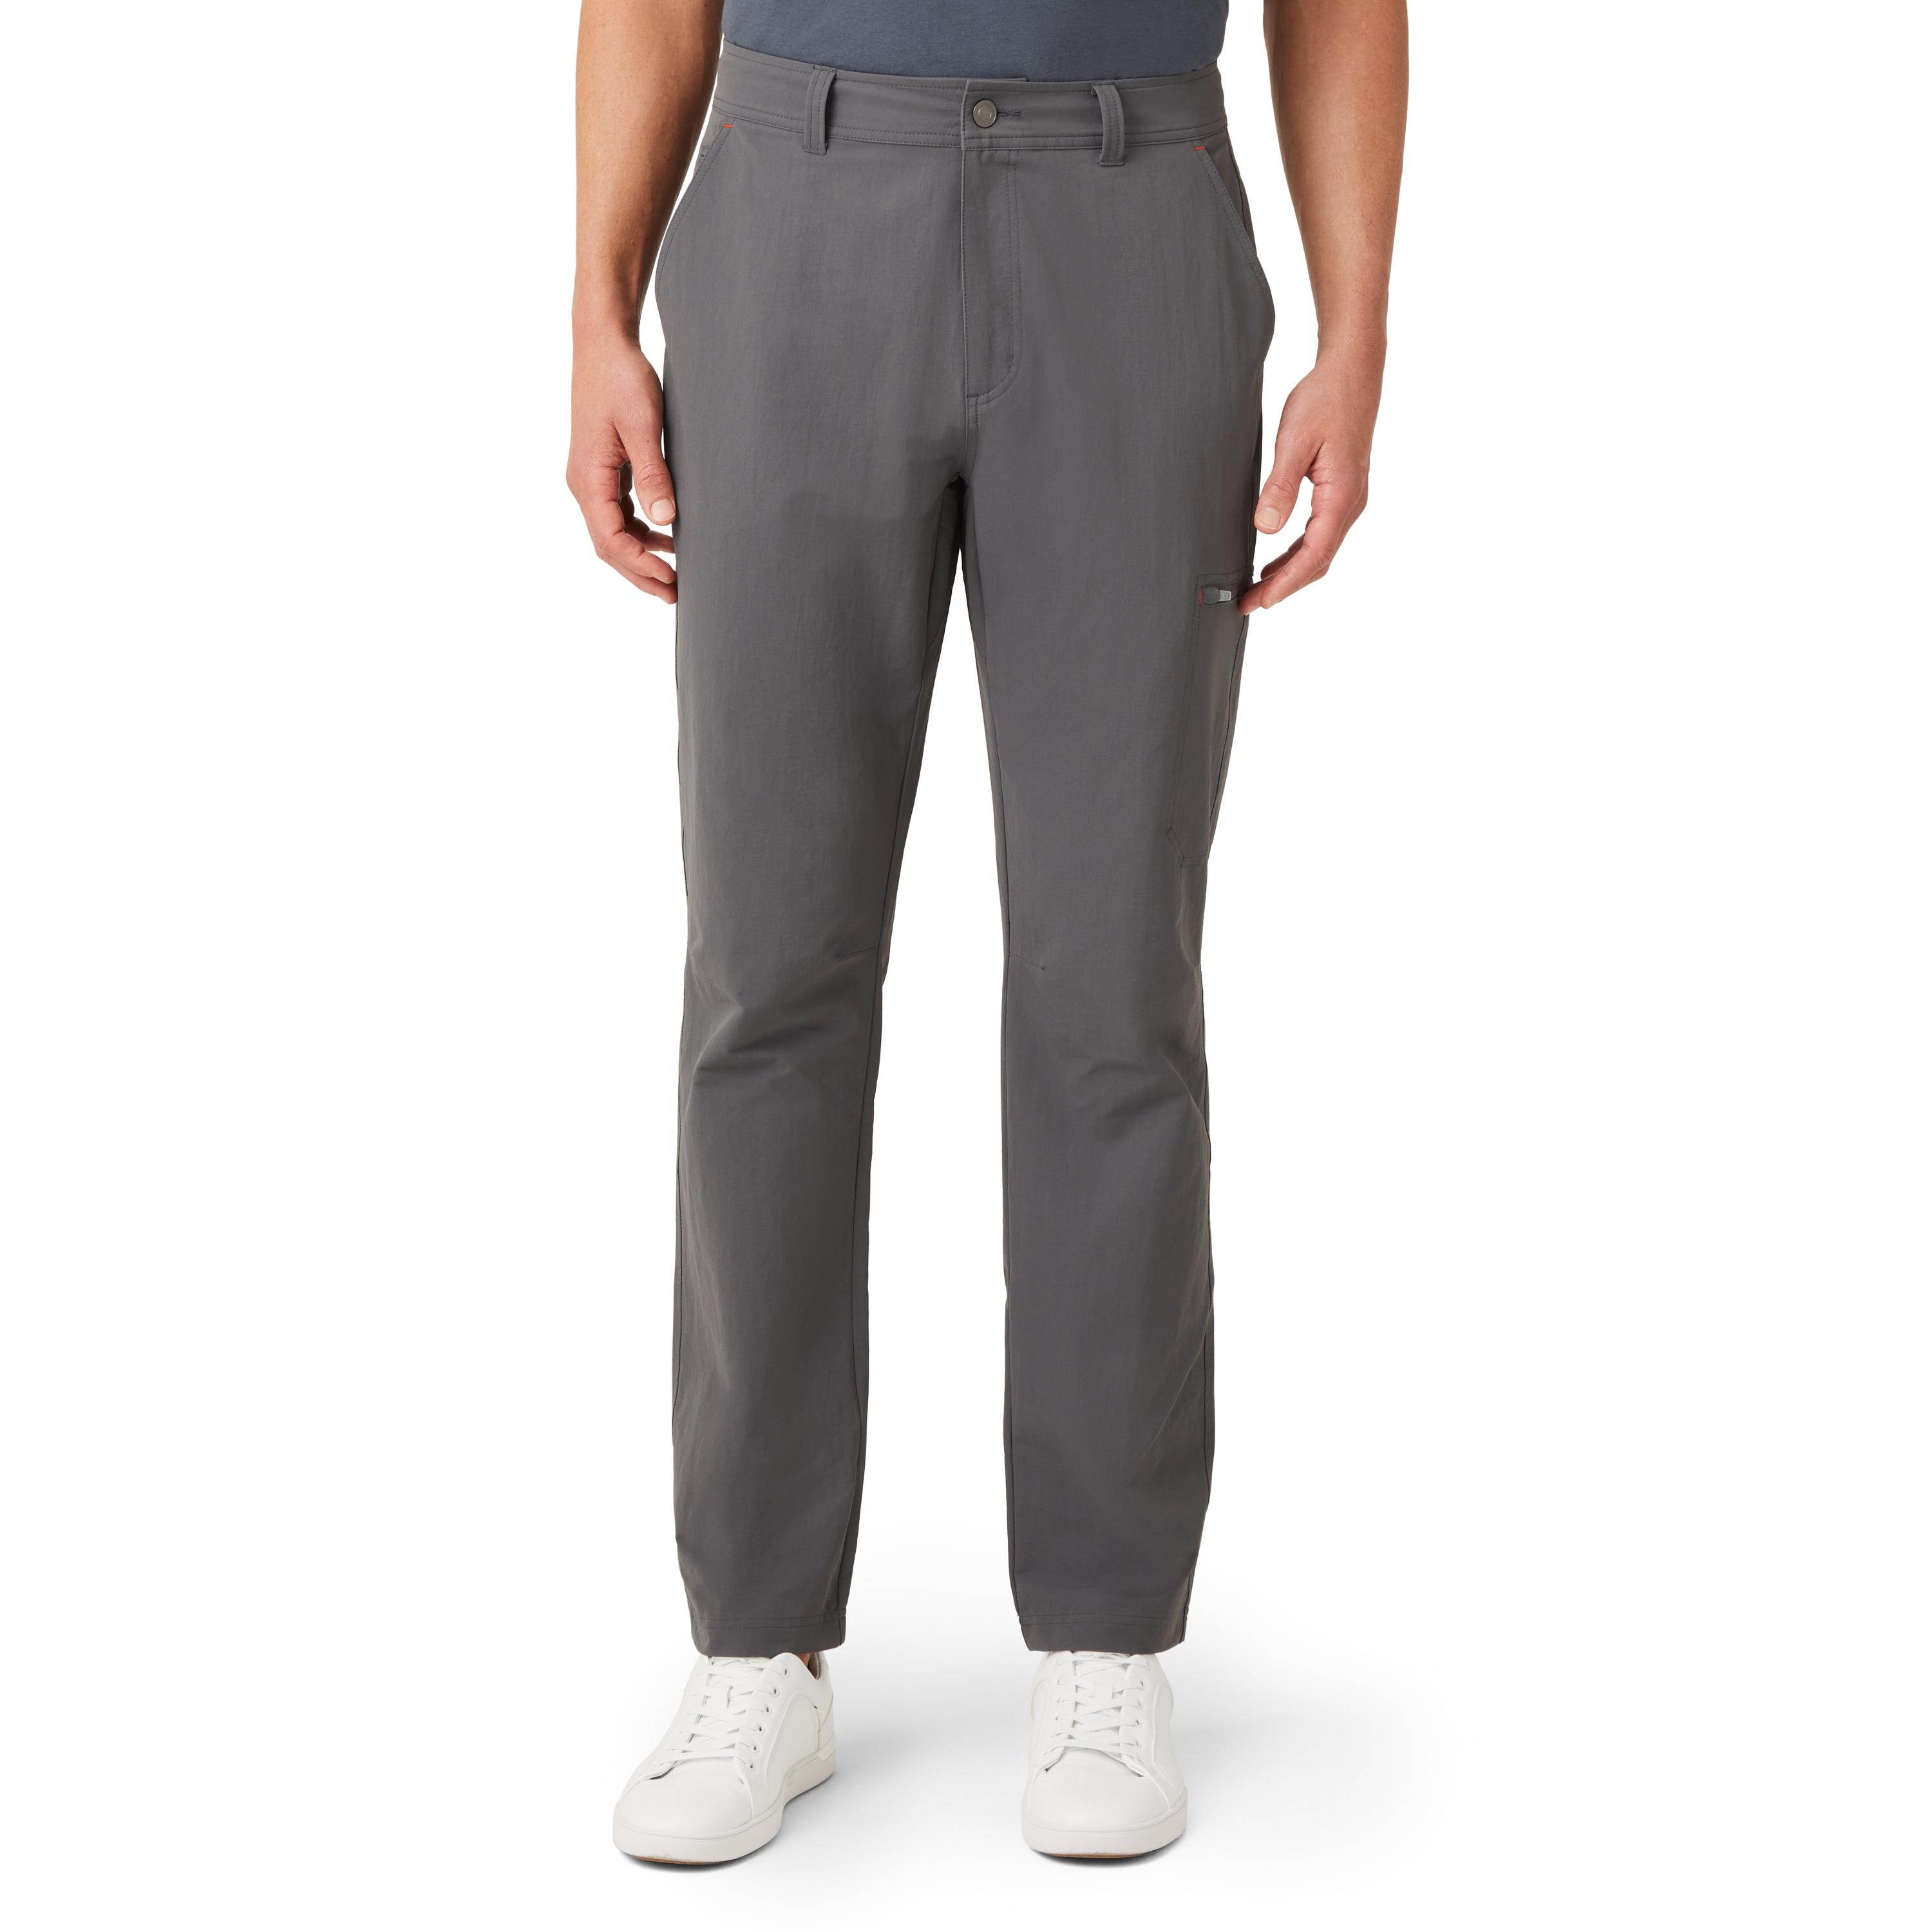 Free Country Men's Charcoal Polyester Work Pants (L/Xl) at Lowes.com